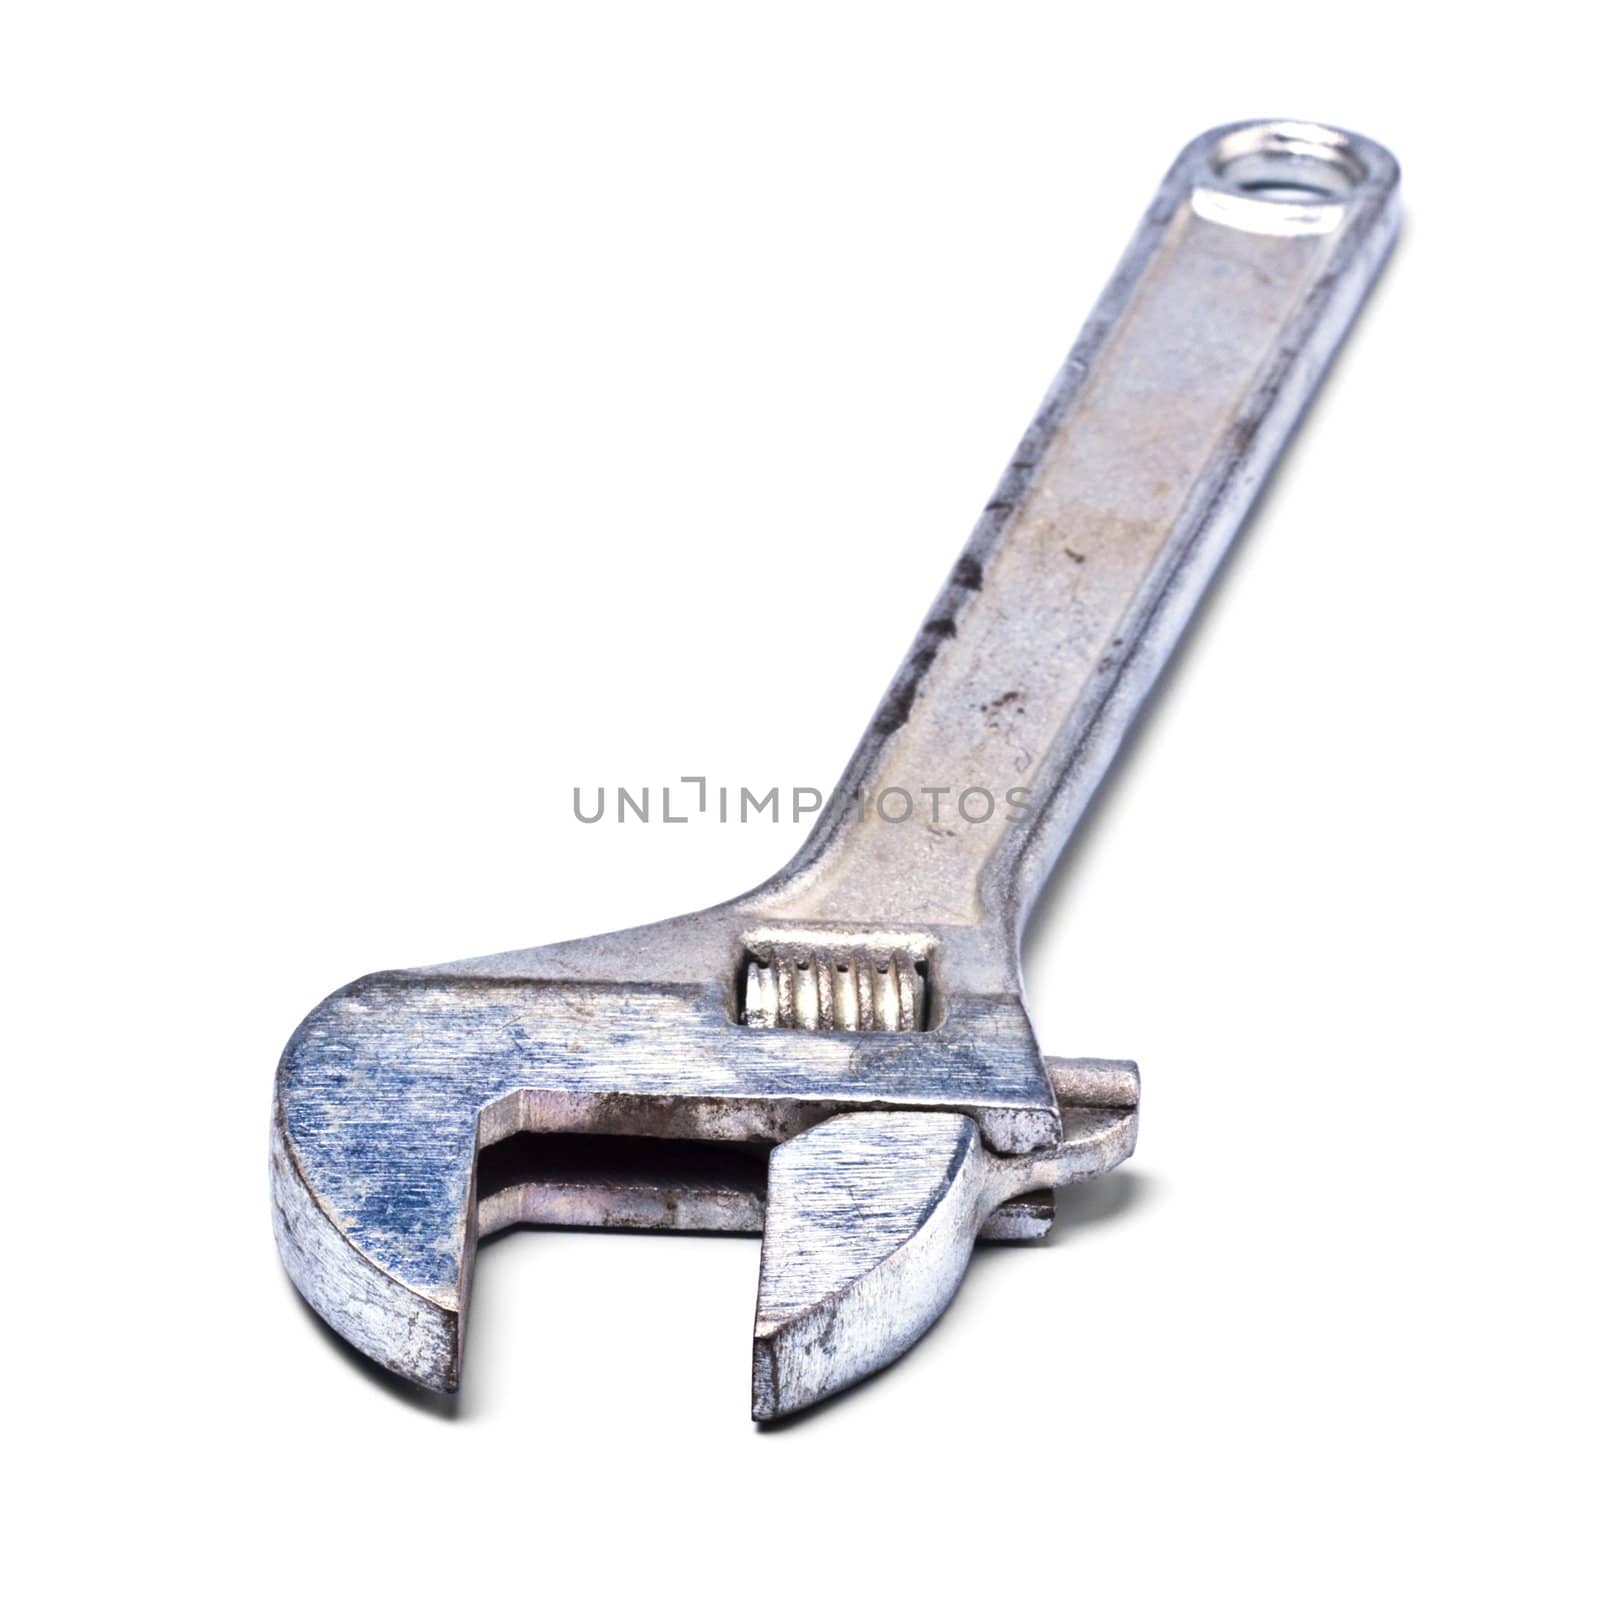 metal ajustable spanner isolated on white background